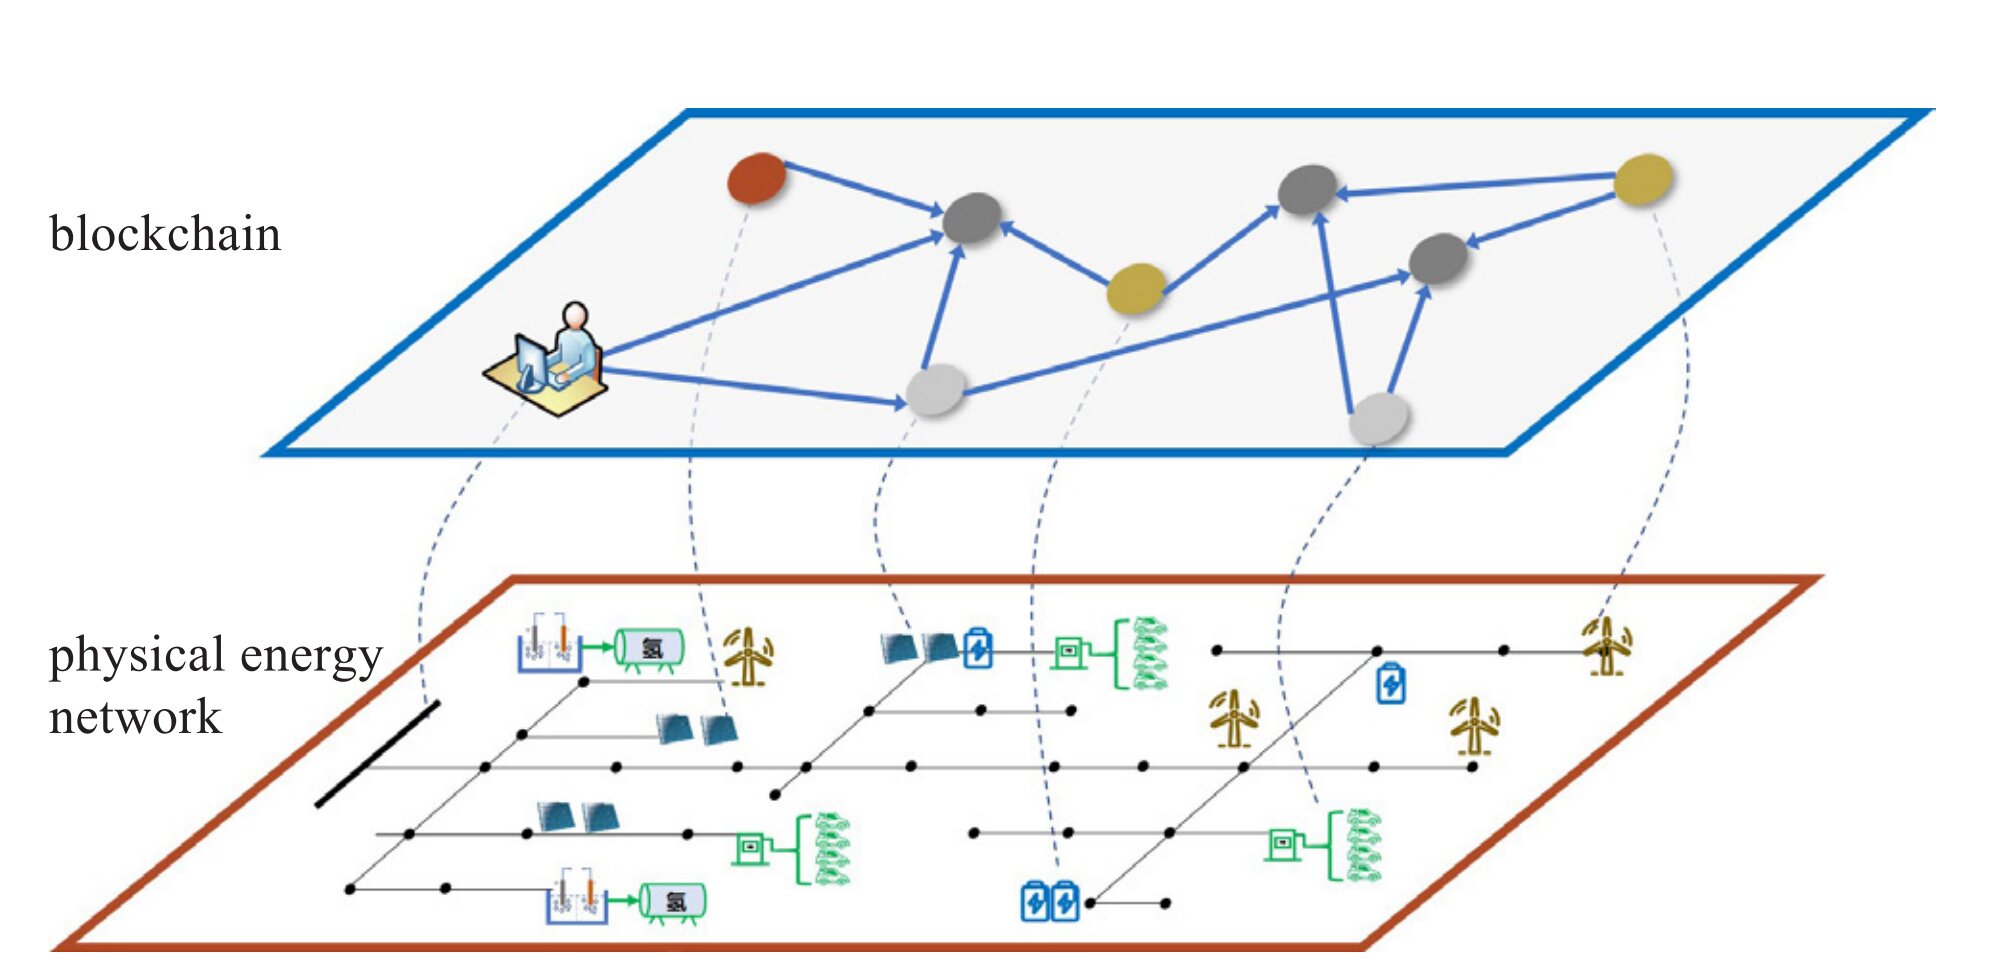 A mechanism for peer-to-peer energy trading in smart grids